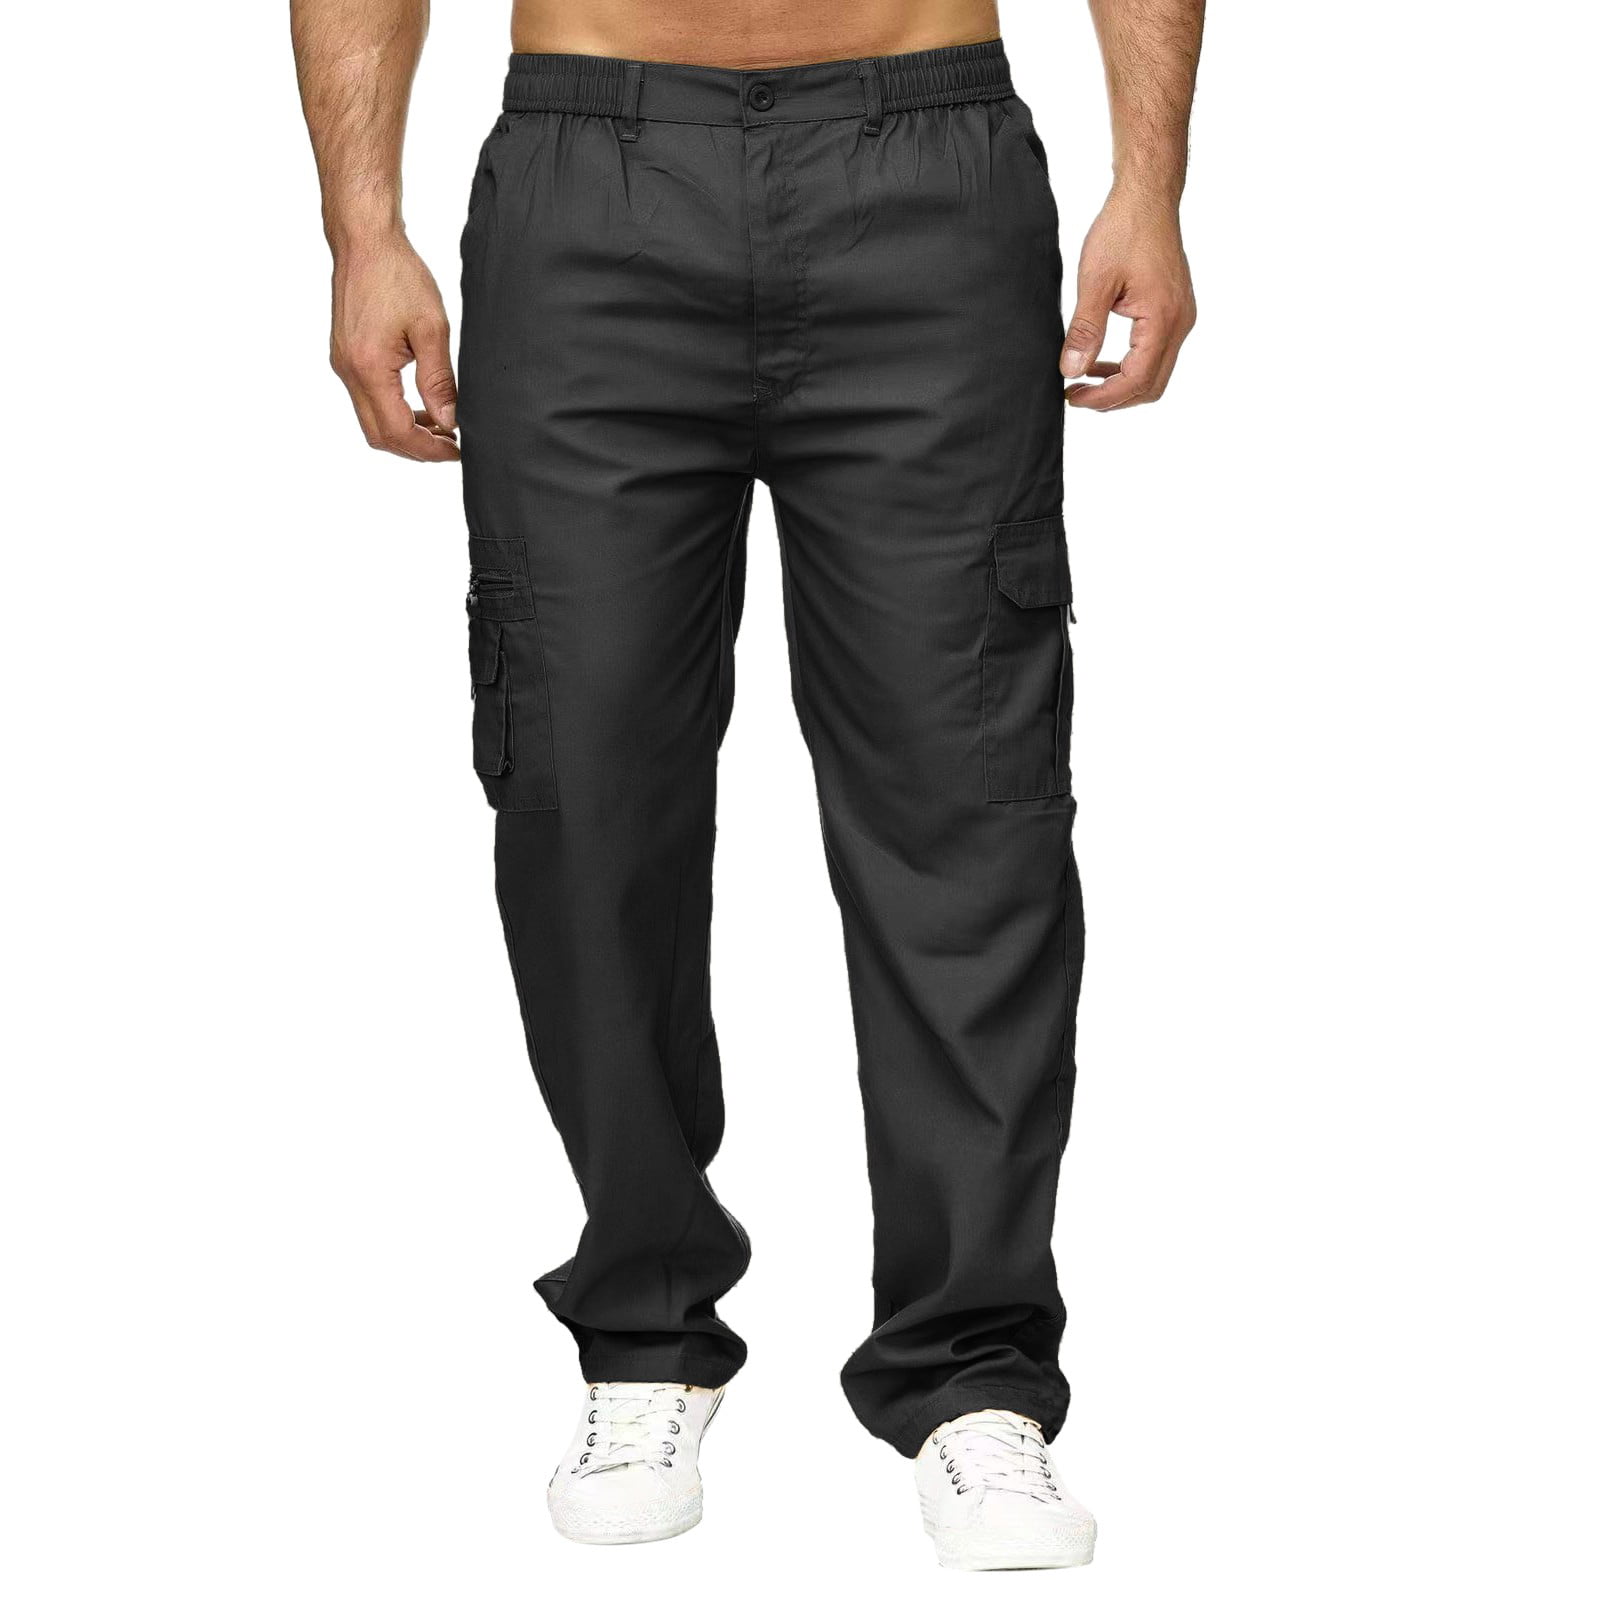 Hemlock Black Cargo Pants for Men Men's Mid-waist Zip Cargo Pants Relaxed Fit Solid Cargo Trousers with Multi-Pocket, Size: 36